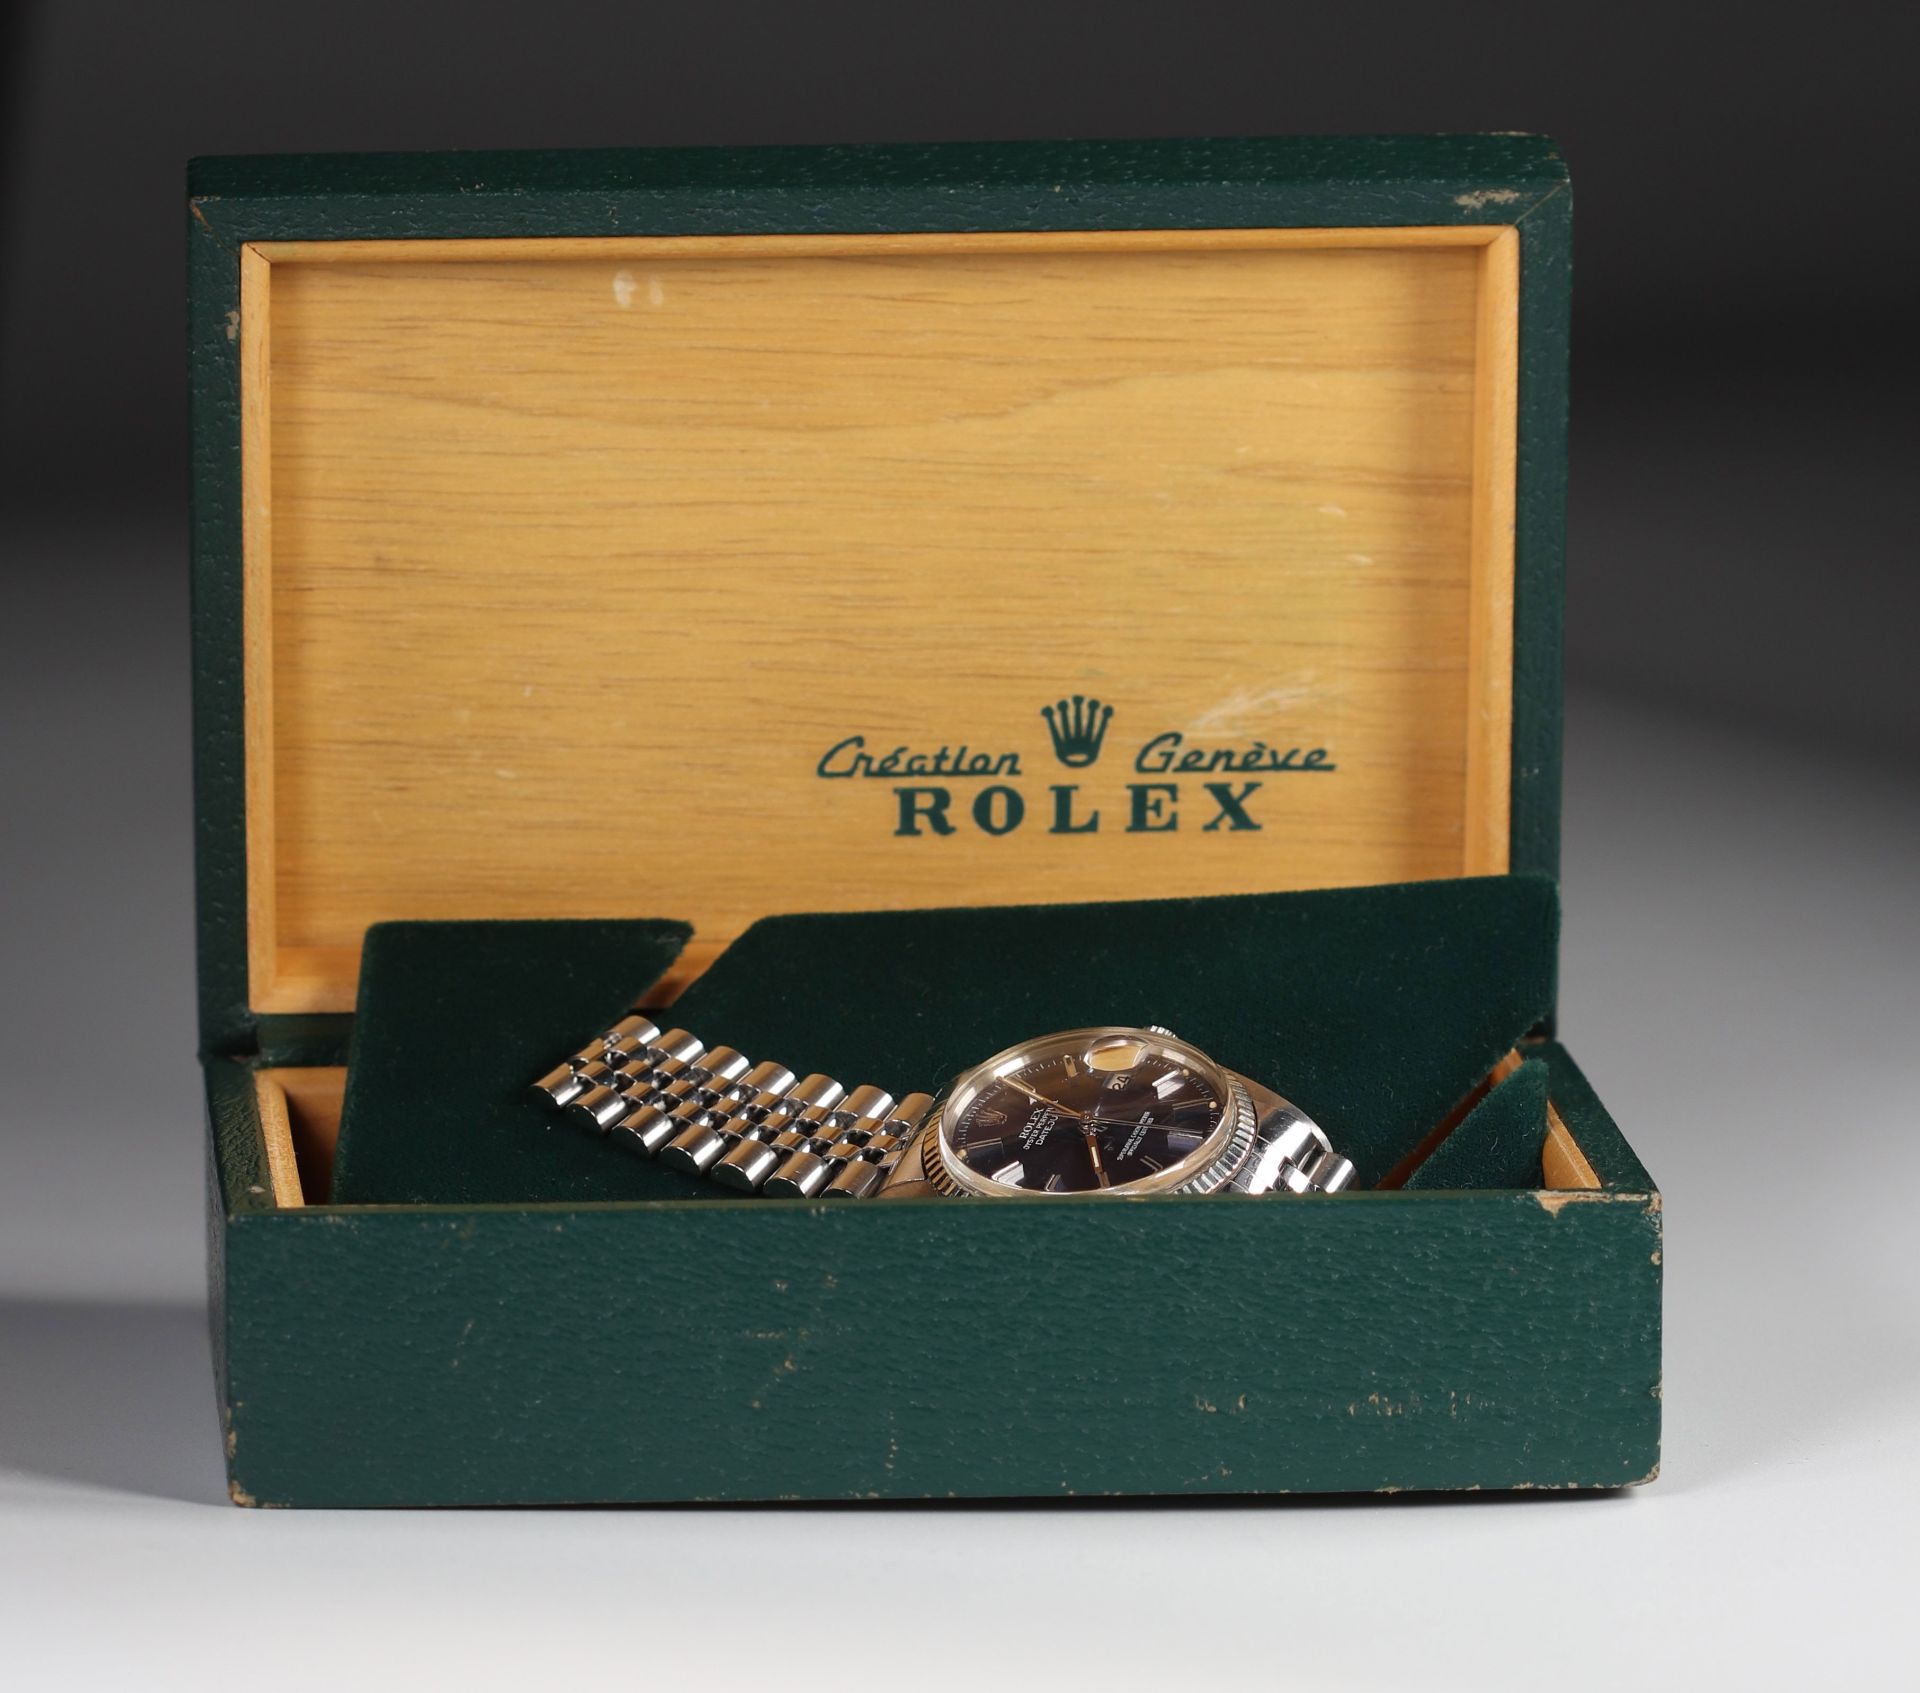 ROLEX - Oyster perpetual Datejust - Image 2 of 2